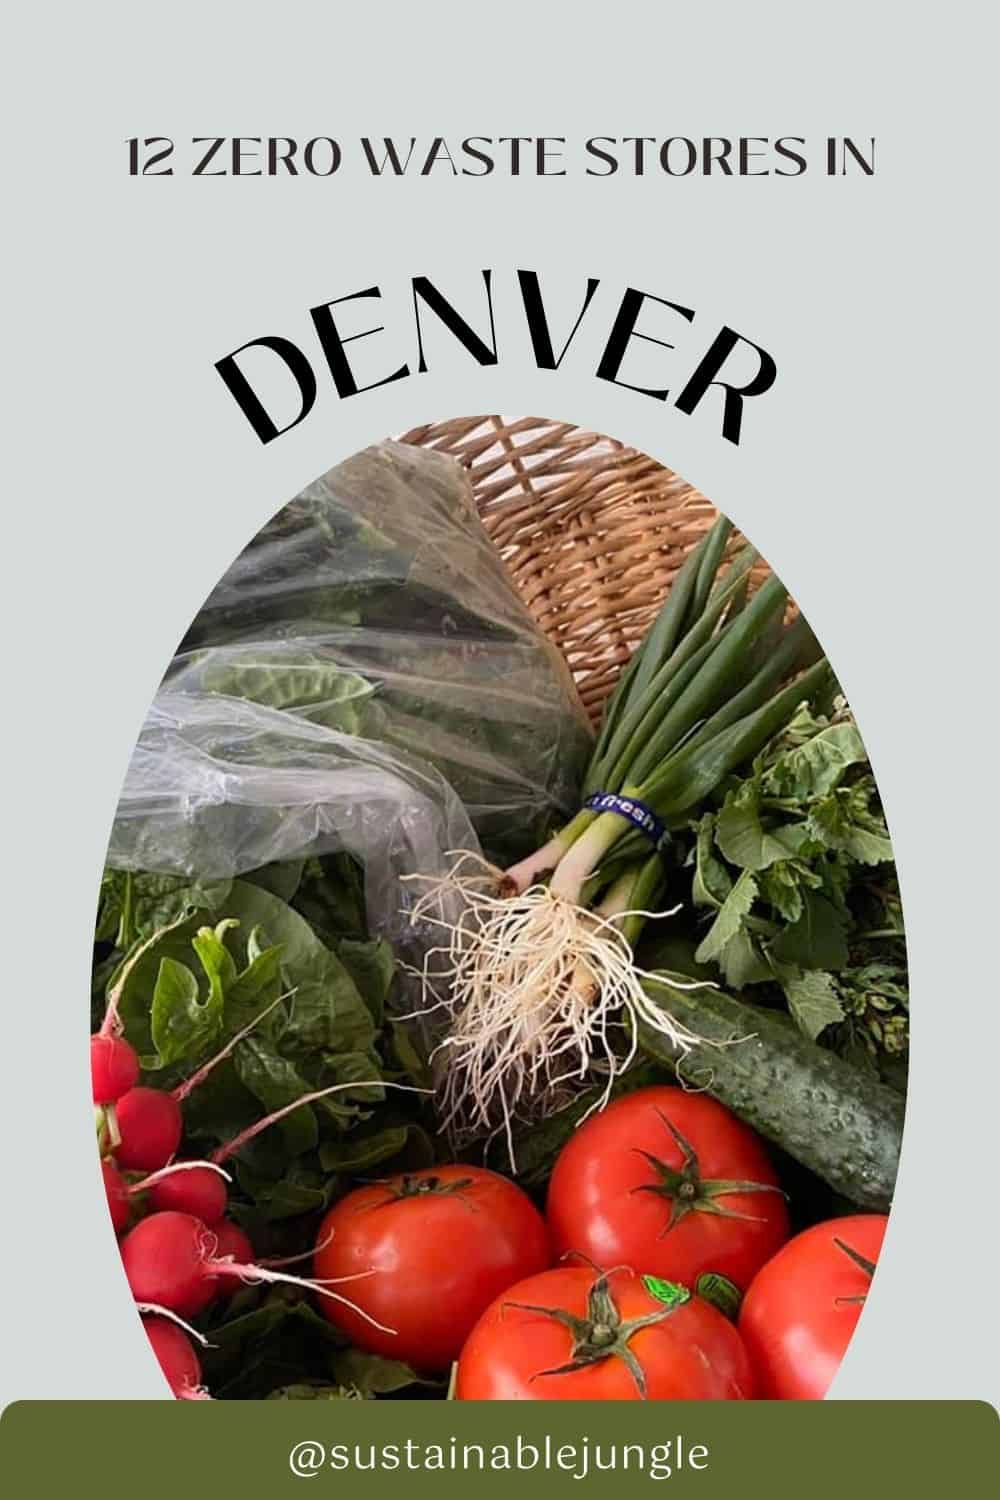 Get Rocky Mountain High On Refills With 12 Zero Waste Stores in Denver Image by Simply Bulk Market #zerowastestoredenver #zerowastestoresindenver #denverzerowastestores #bulkstoresdenver #bulkfoodstoresdenver #sustainablejungle